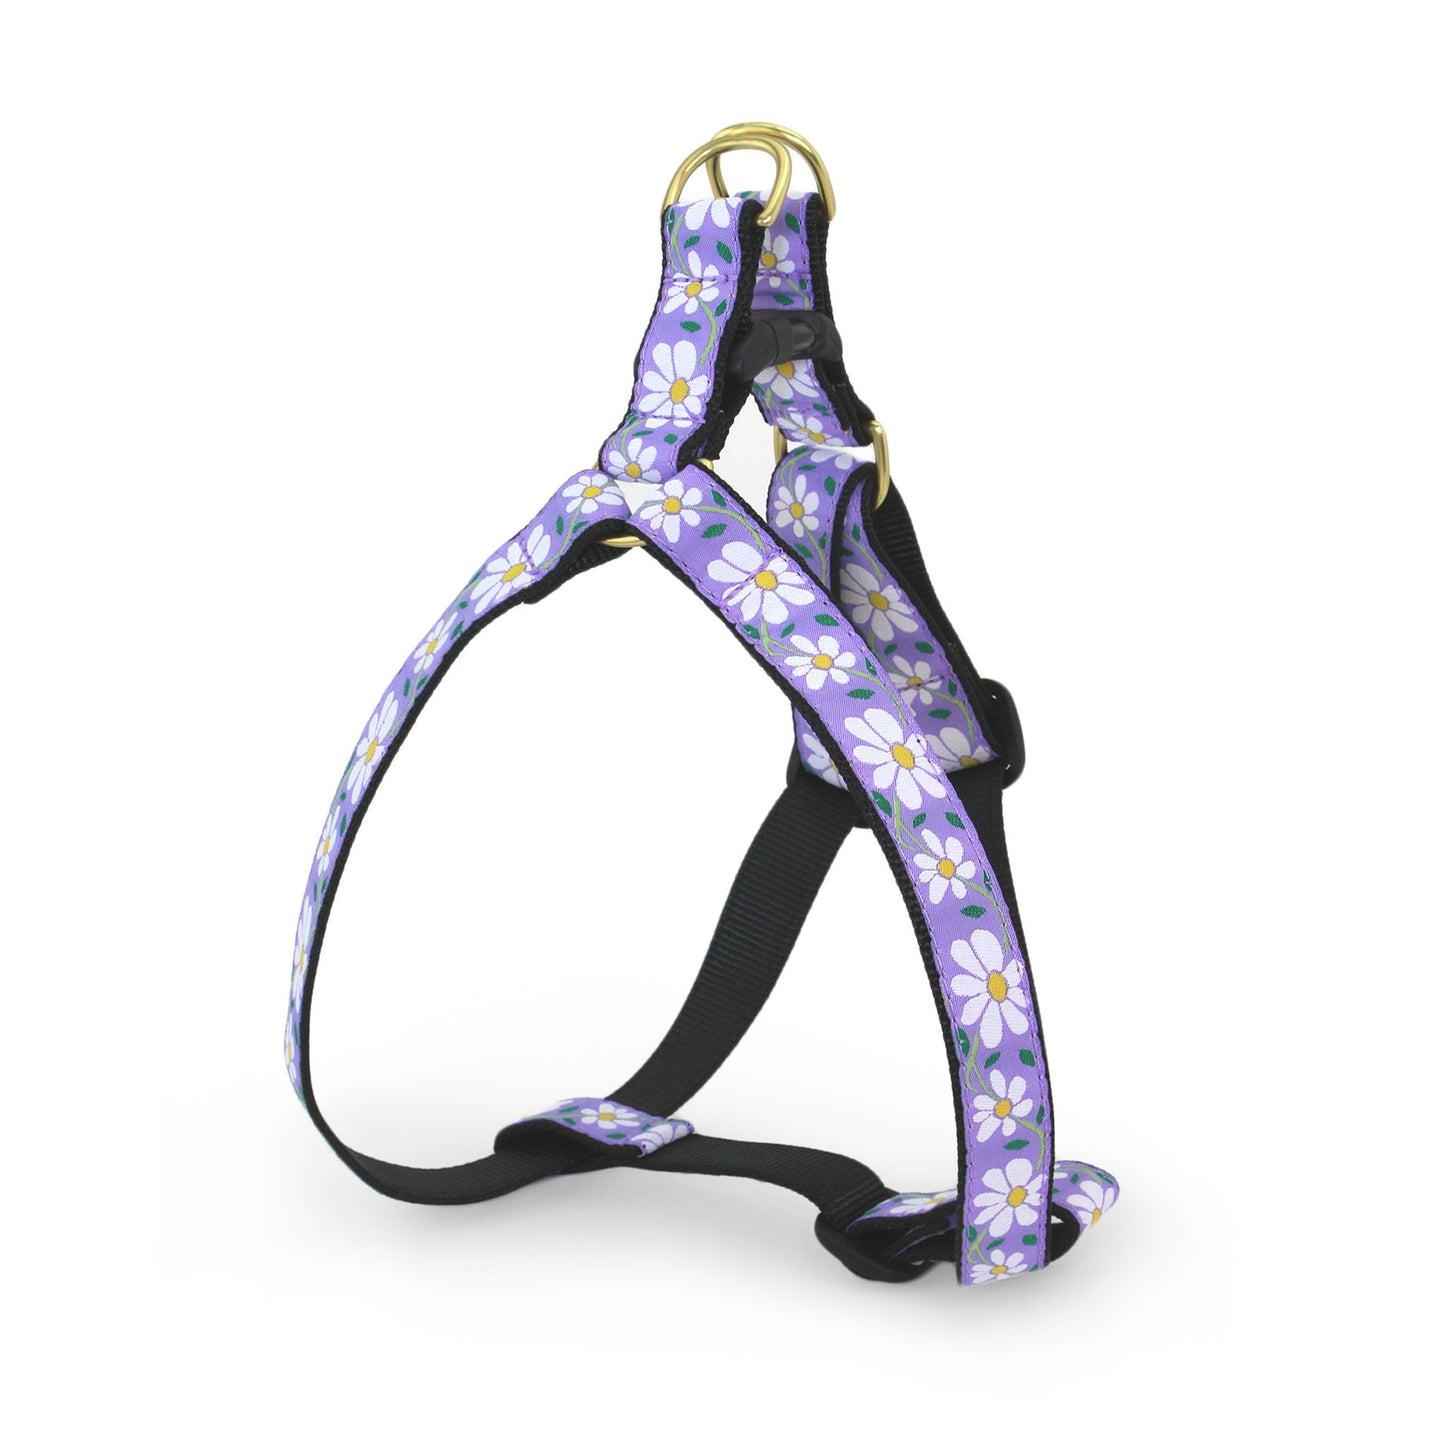 Daisy Dog Harness by Up Country